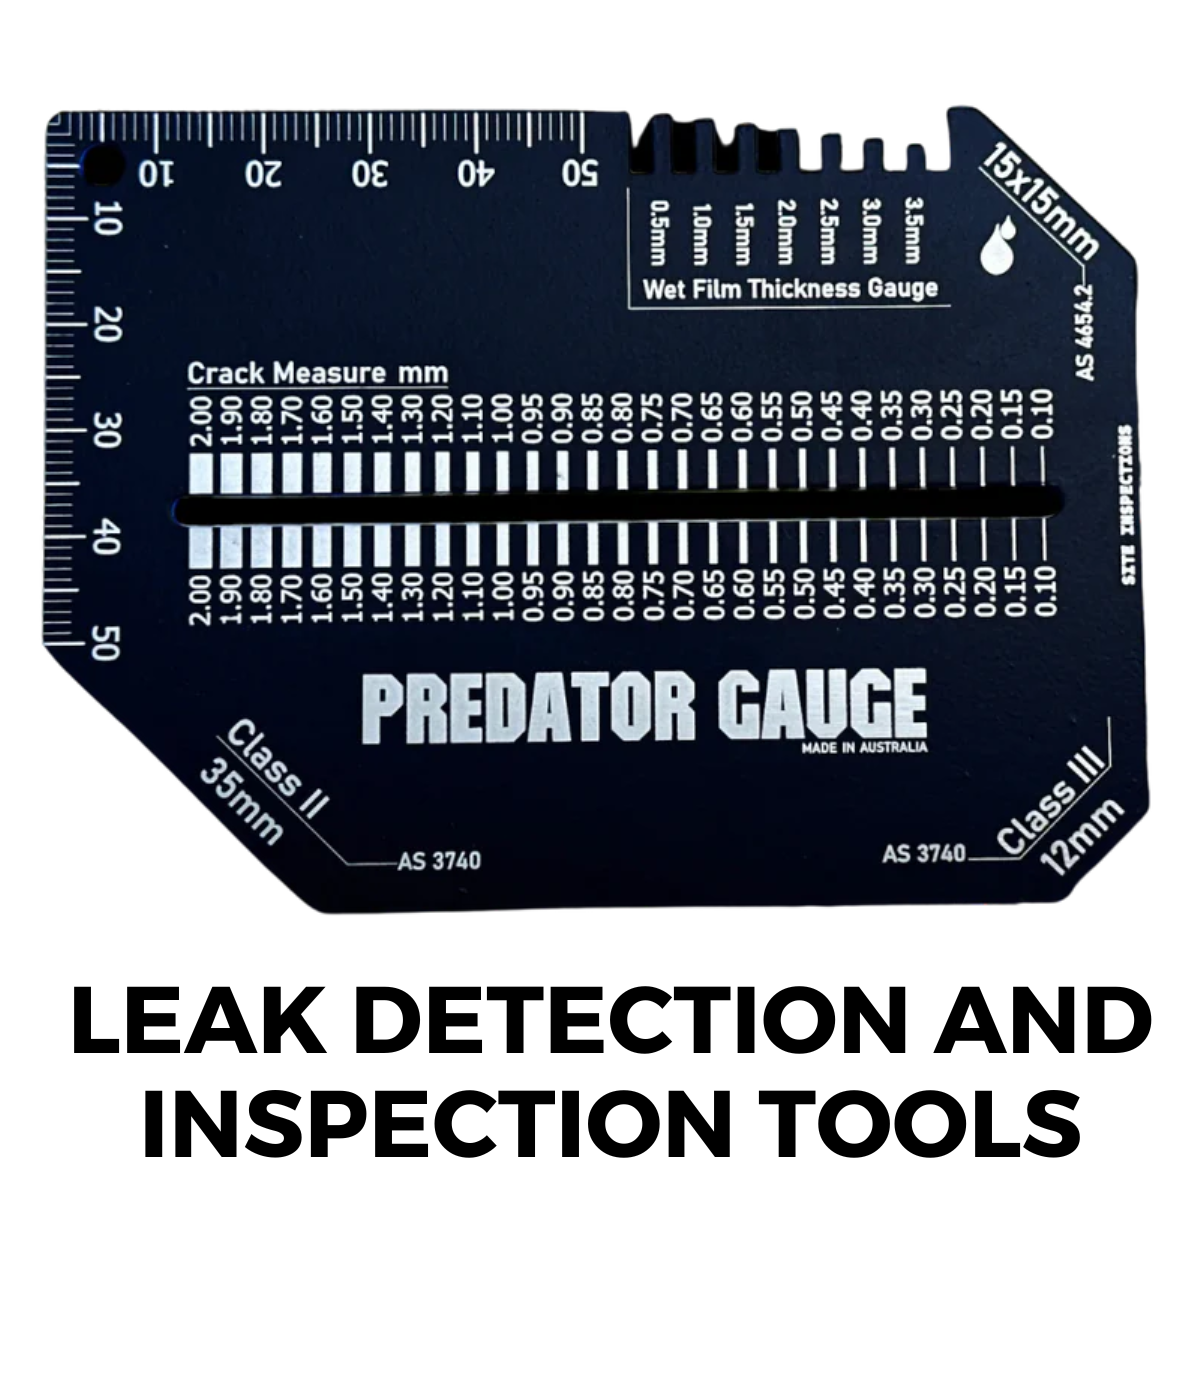 Leak Detection and Inspection Tools